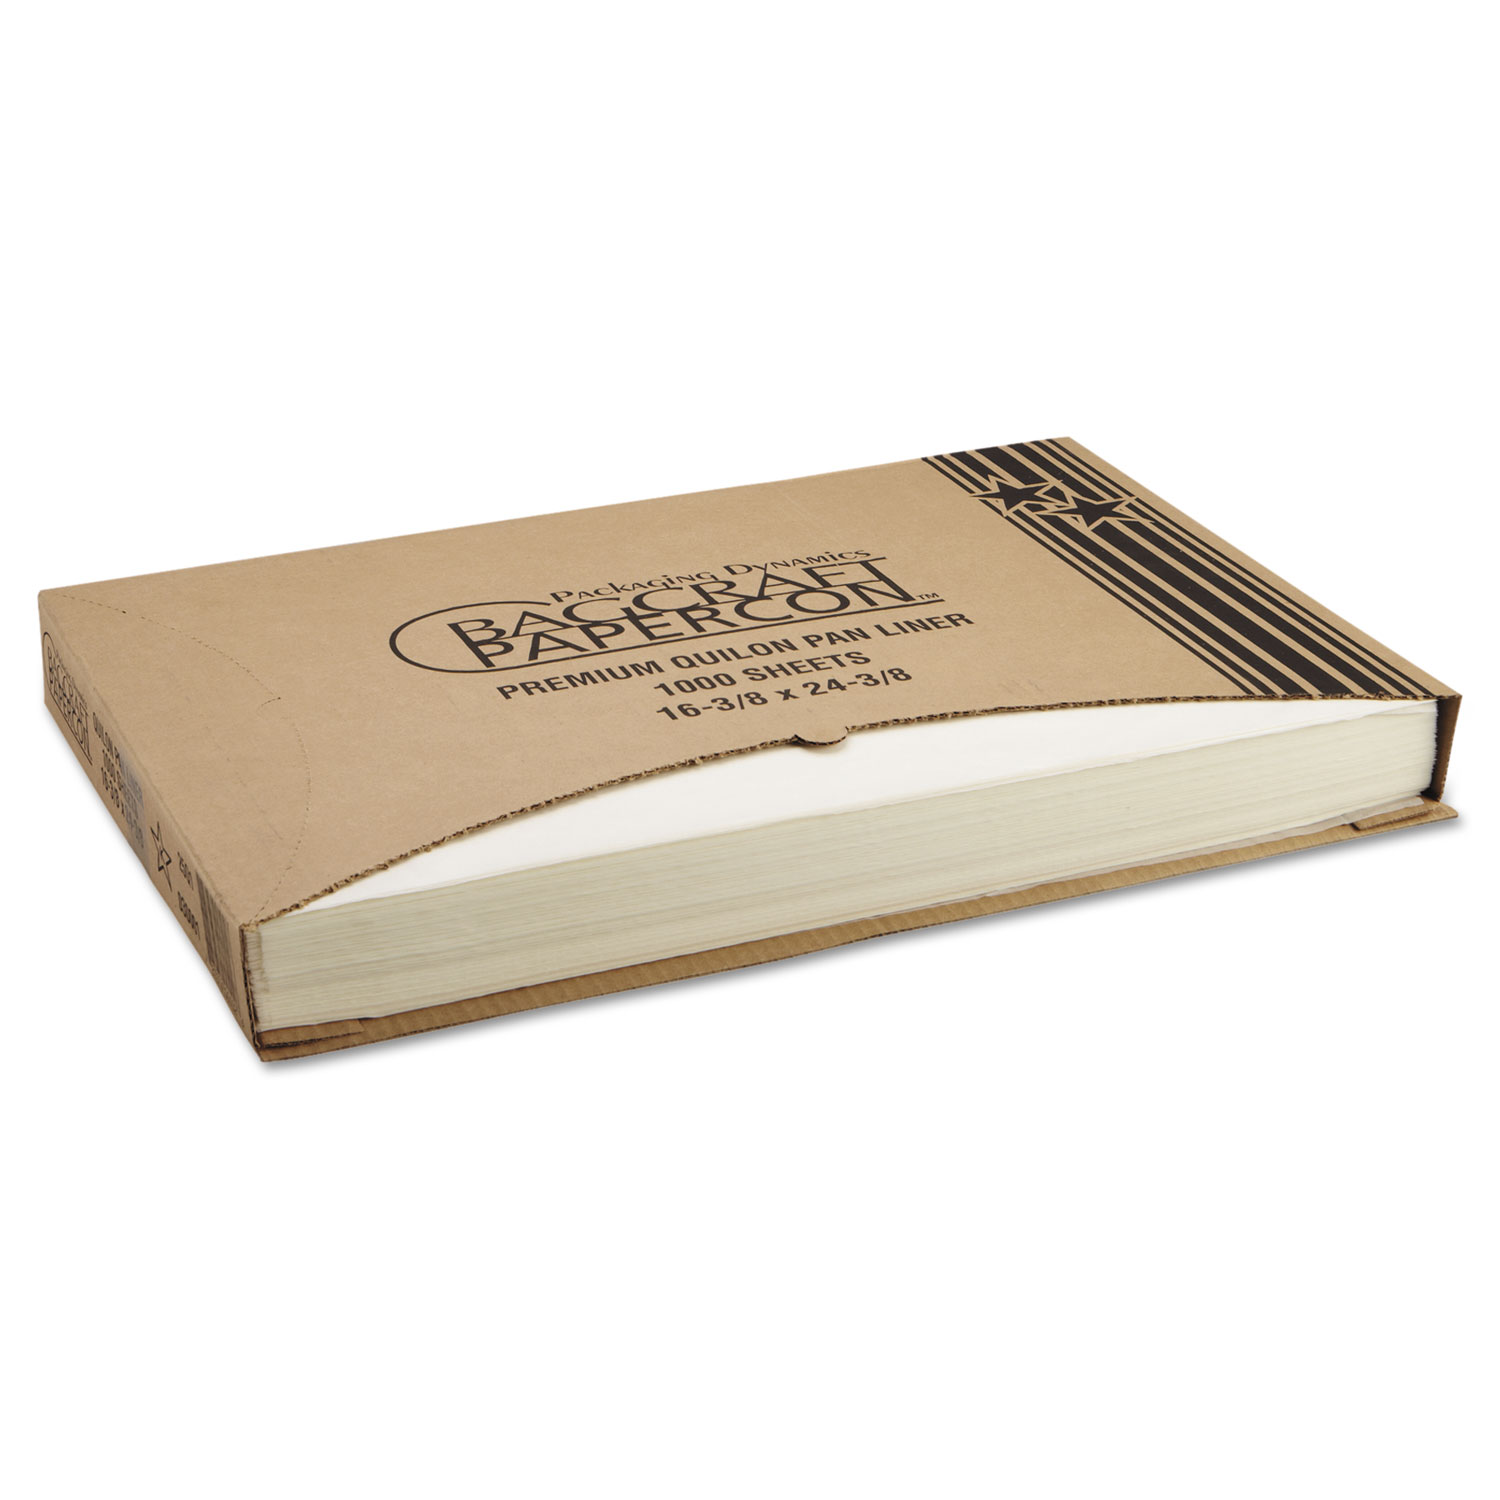  Bagcraft P030001 Grease-Proof Quilon Pan Liners, 16 3/8 x 24 3/8, White, 1000 Sheets/Carton (BGC030001) 